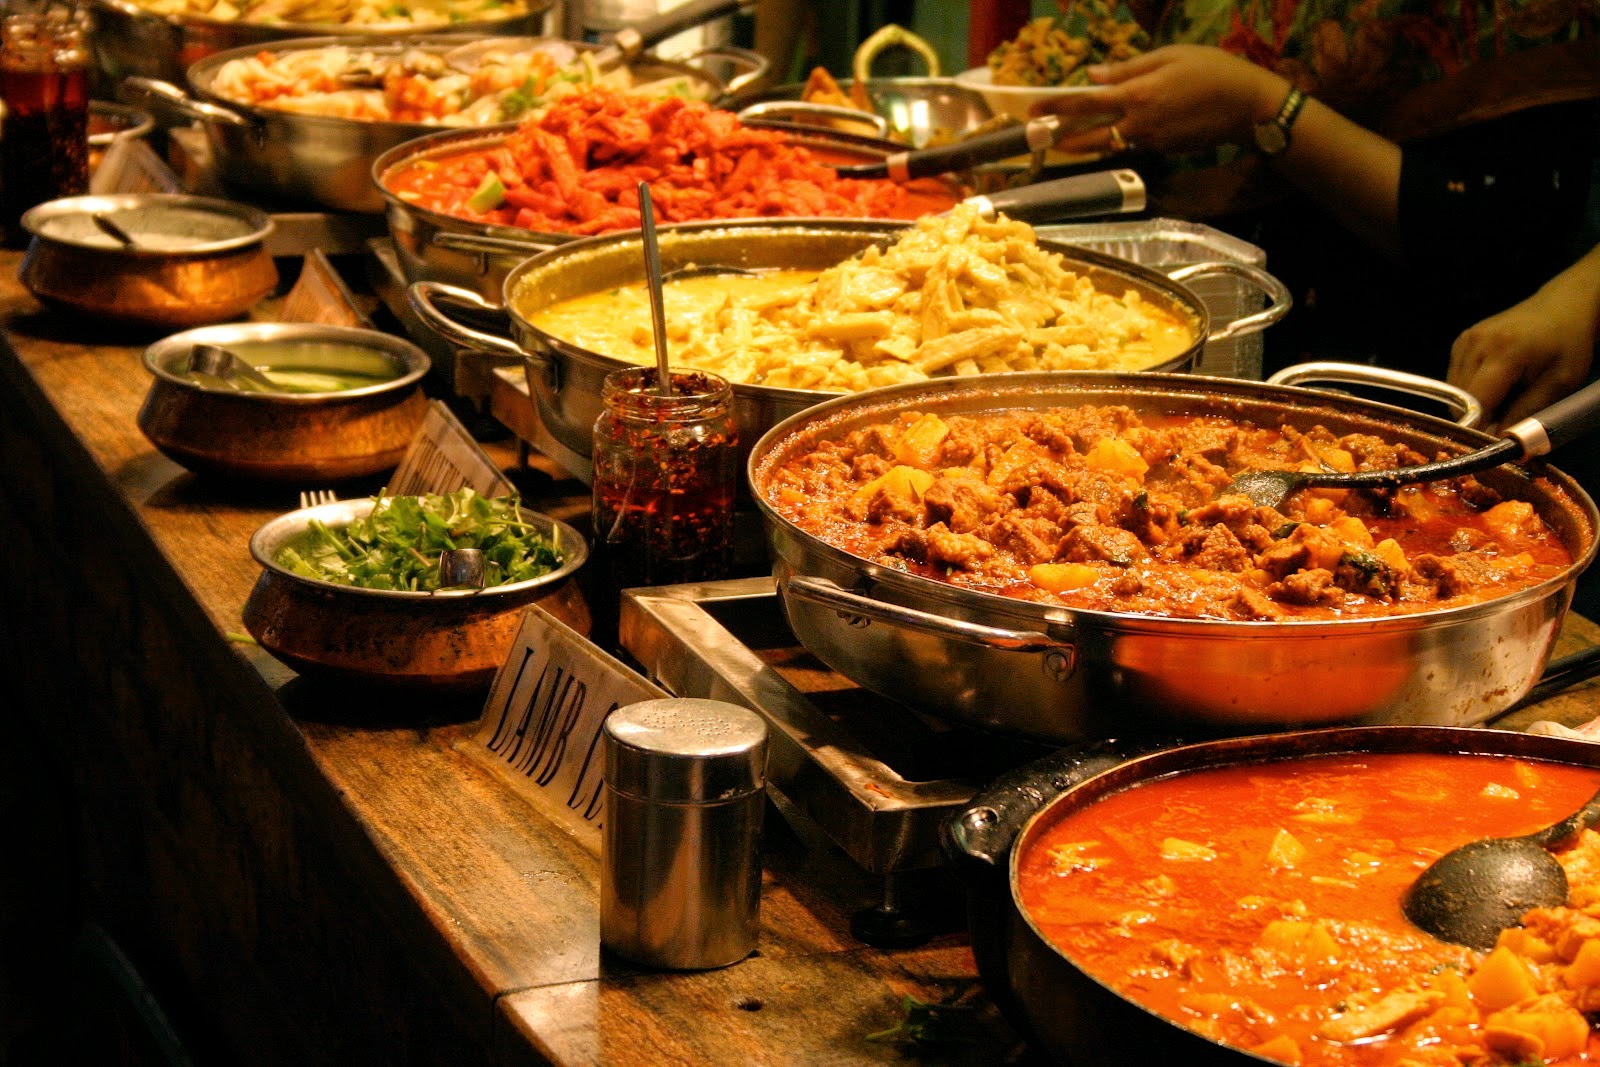 Variety of Indian Dishes